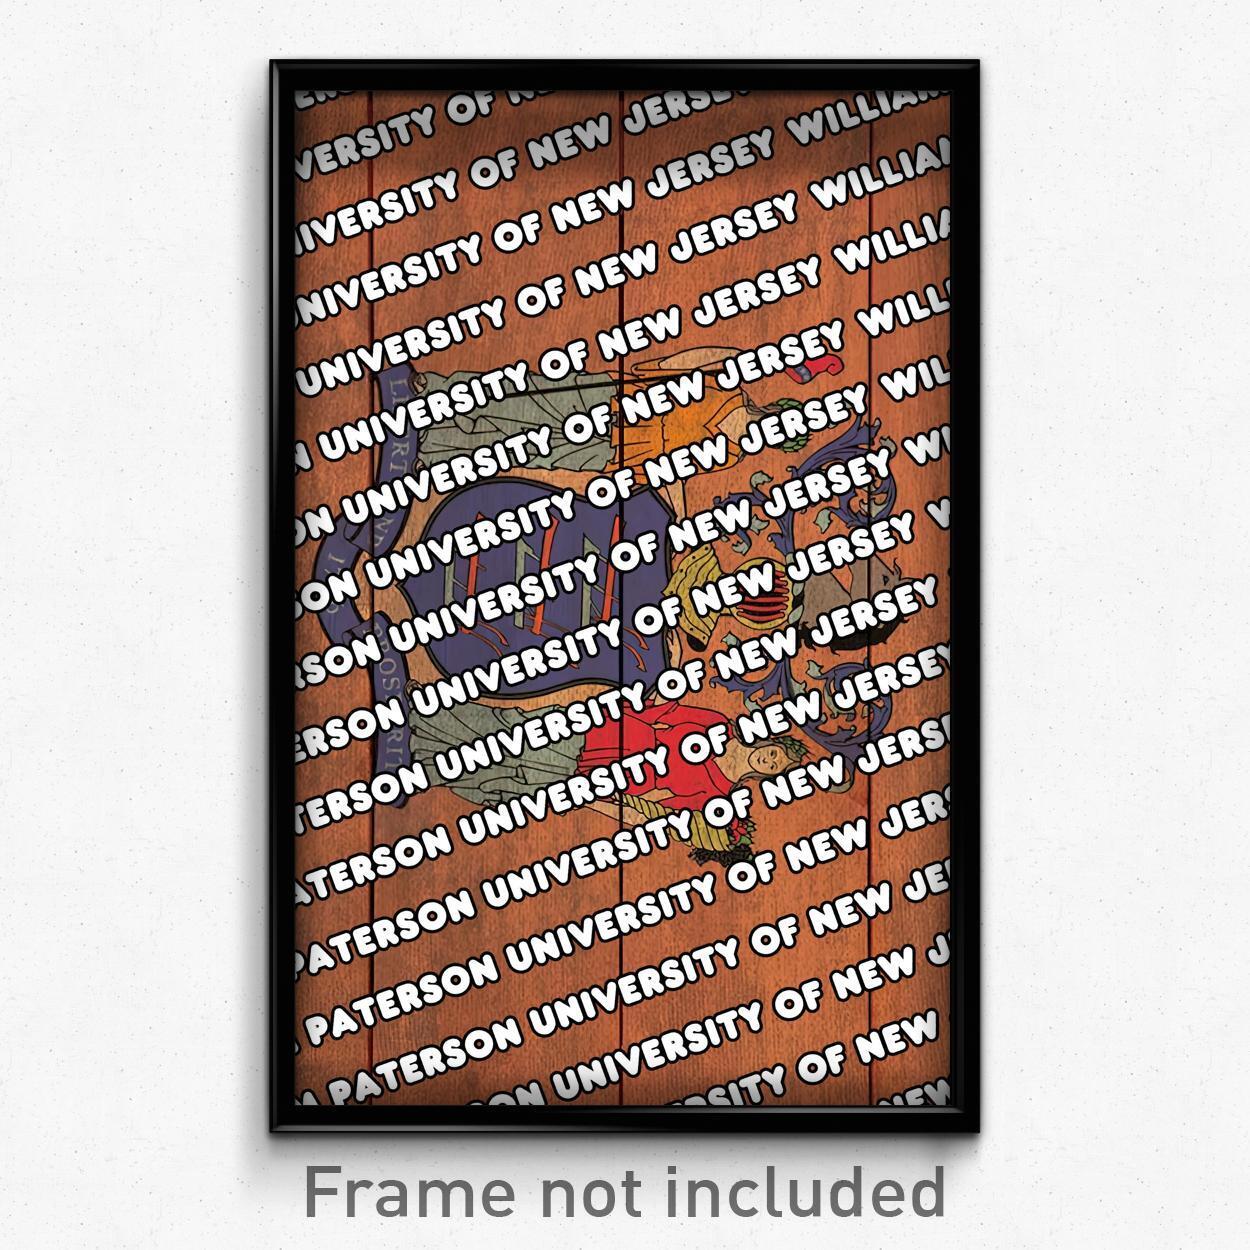 William Paterson University of New Jersey New Jersey Poster